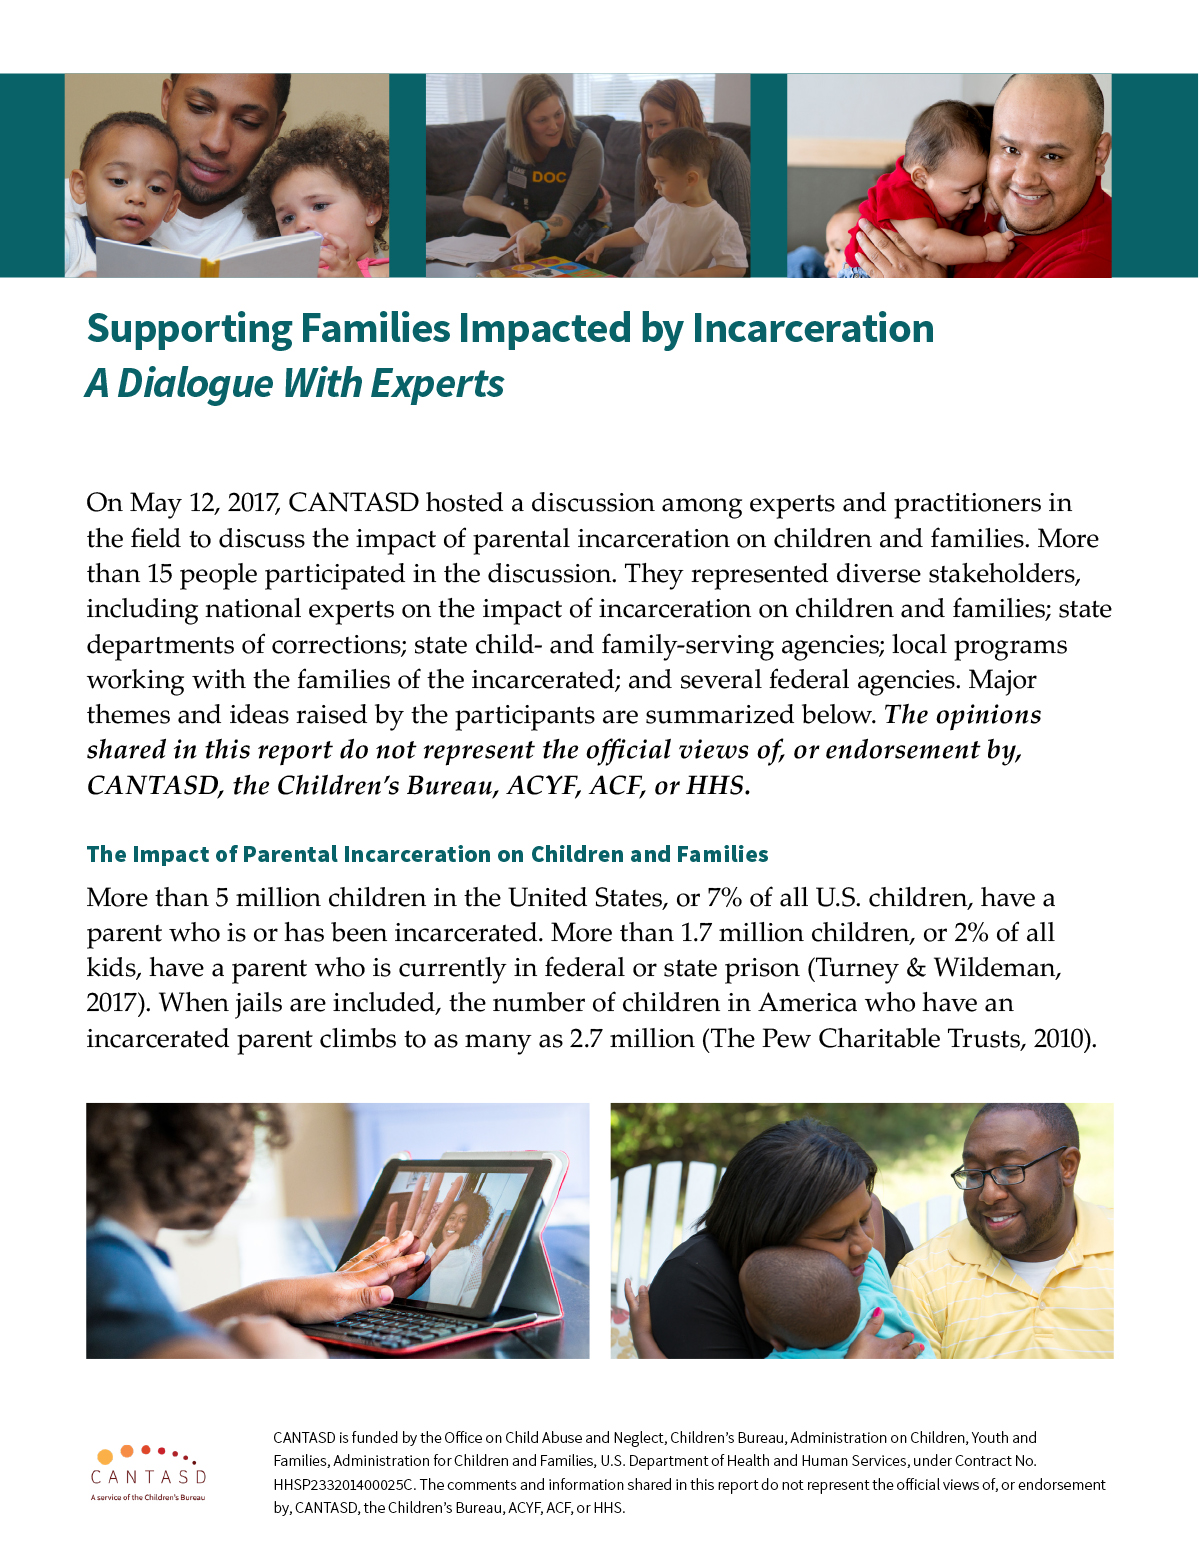 Supporting Families Impacted by Incarceration: A Dialogue with Experts